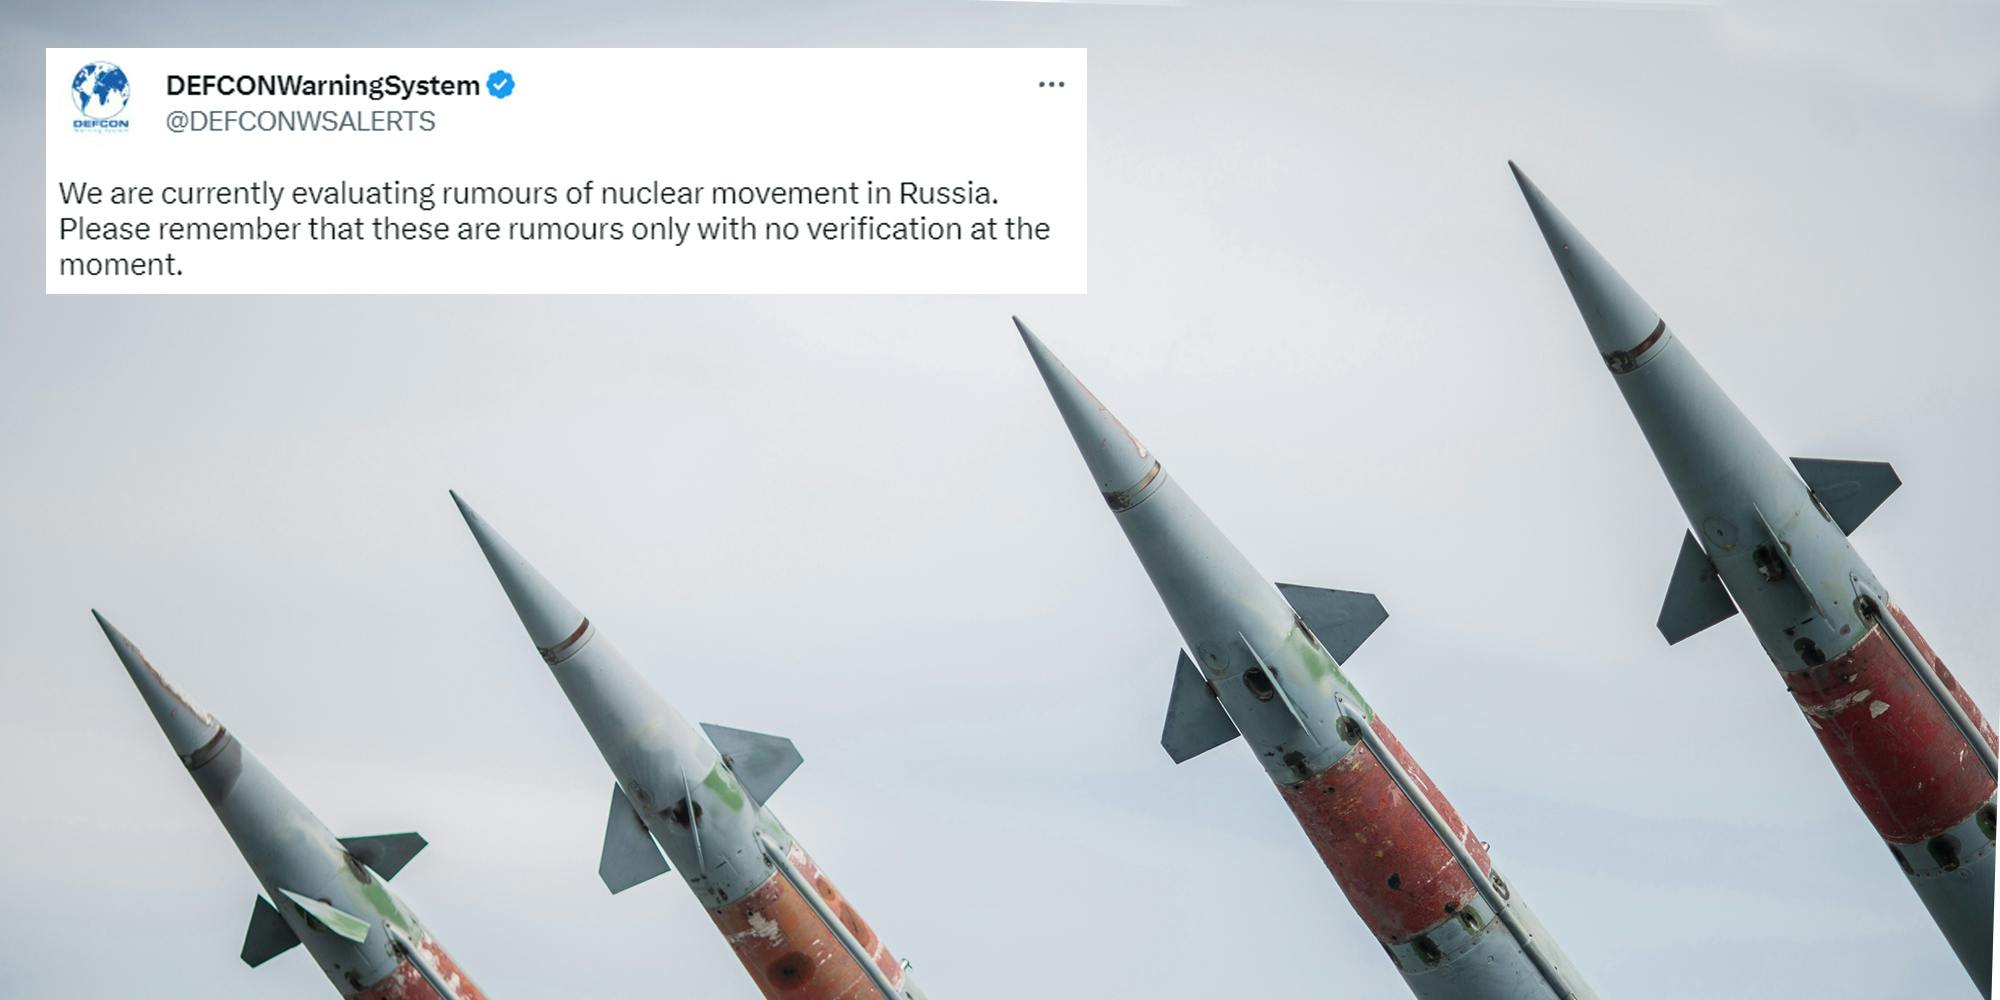 Nuclear Missiles With Warhead Aimed at Gloomy Sky with Tweet in top left corner by @DEFCONWSALERTS "We are currently evaluating rumours of nuclear movement in Russia. Please remember that these are rumours only with no verification at the moment."